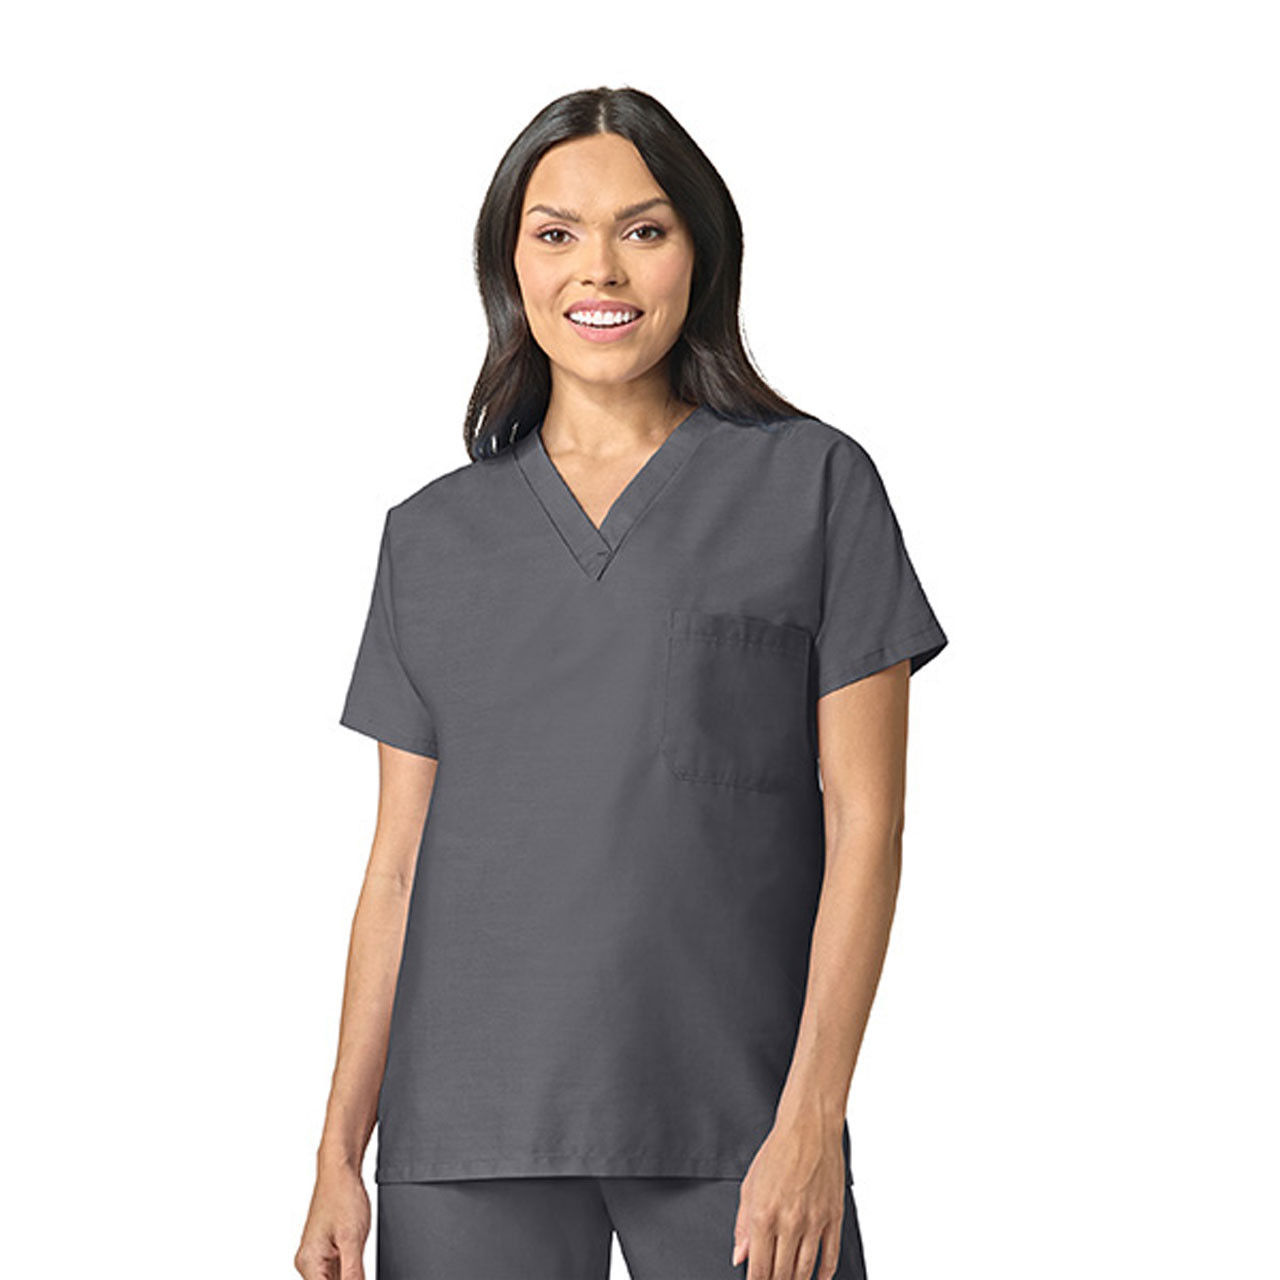 What is the Pewter Gray Scrub Top made of?